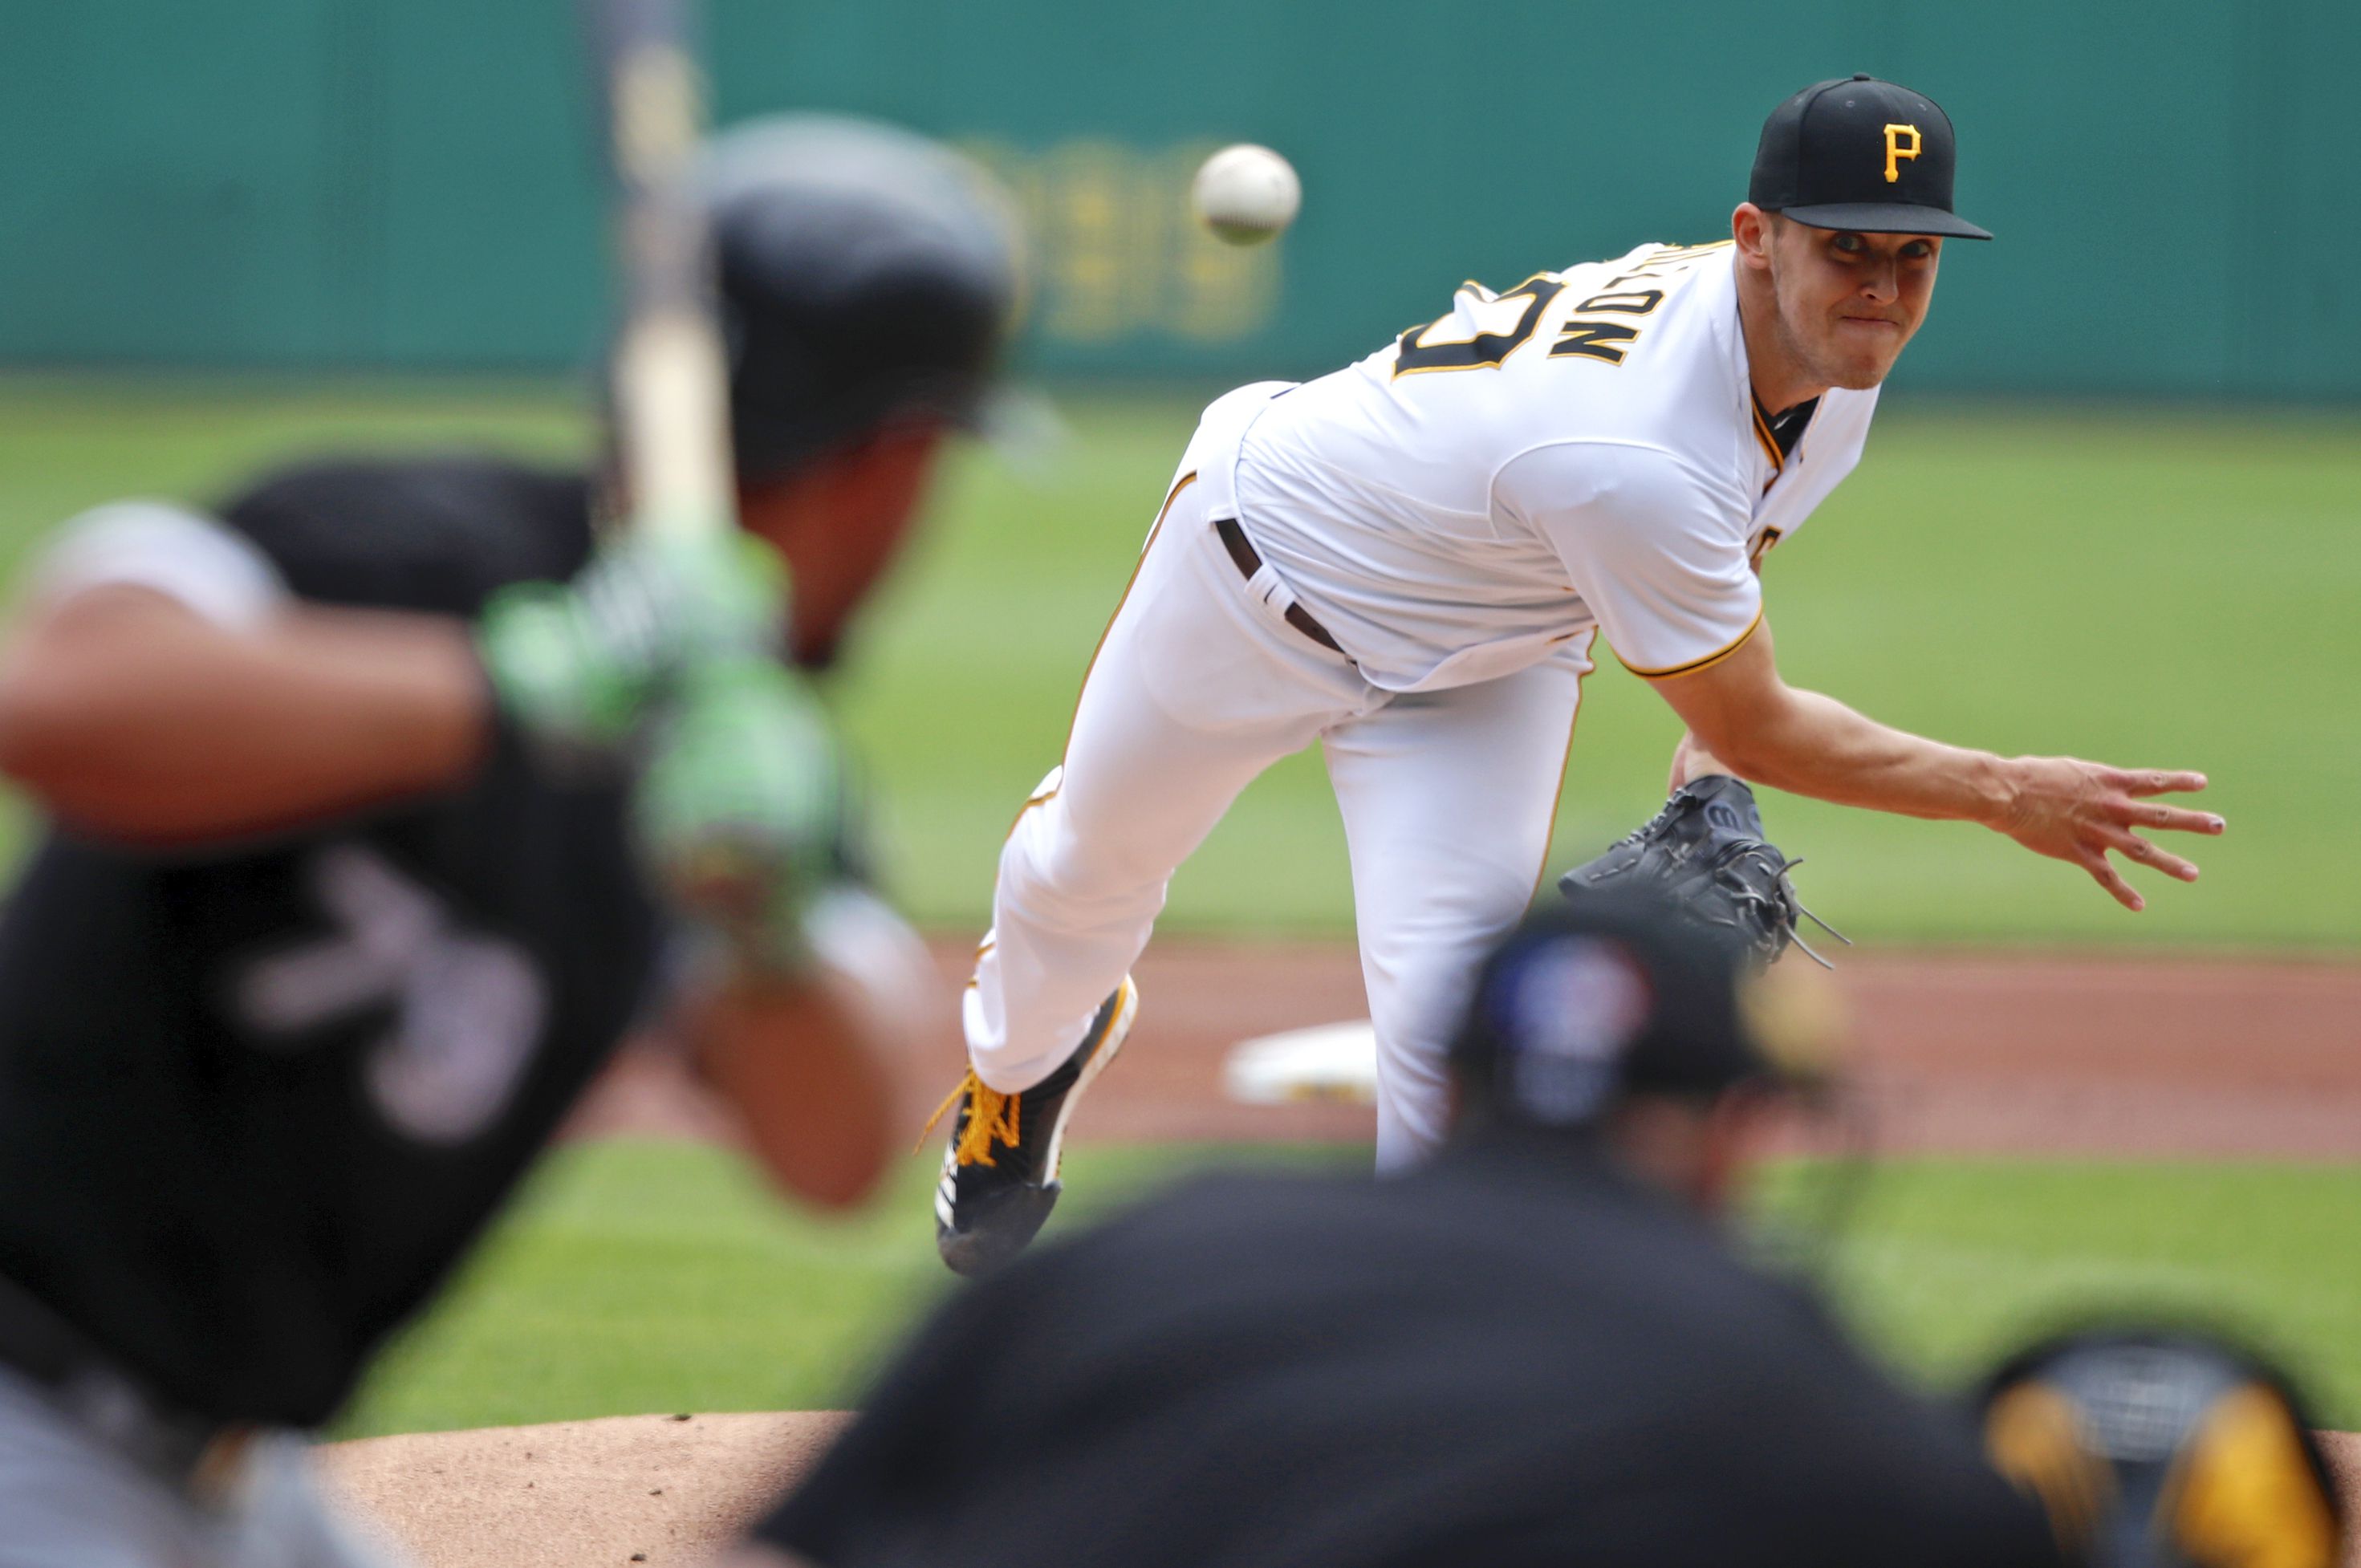 Jameson Taillon, Gerrit Cole react to Yankees-Pirates trade